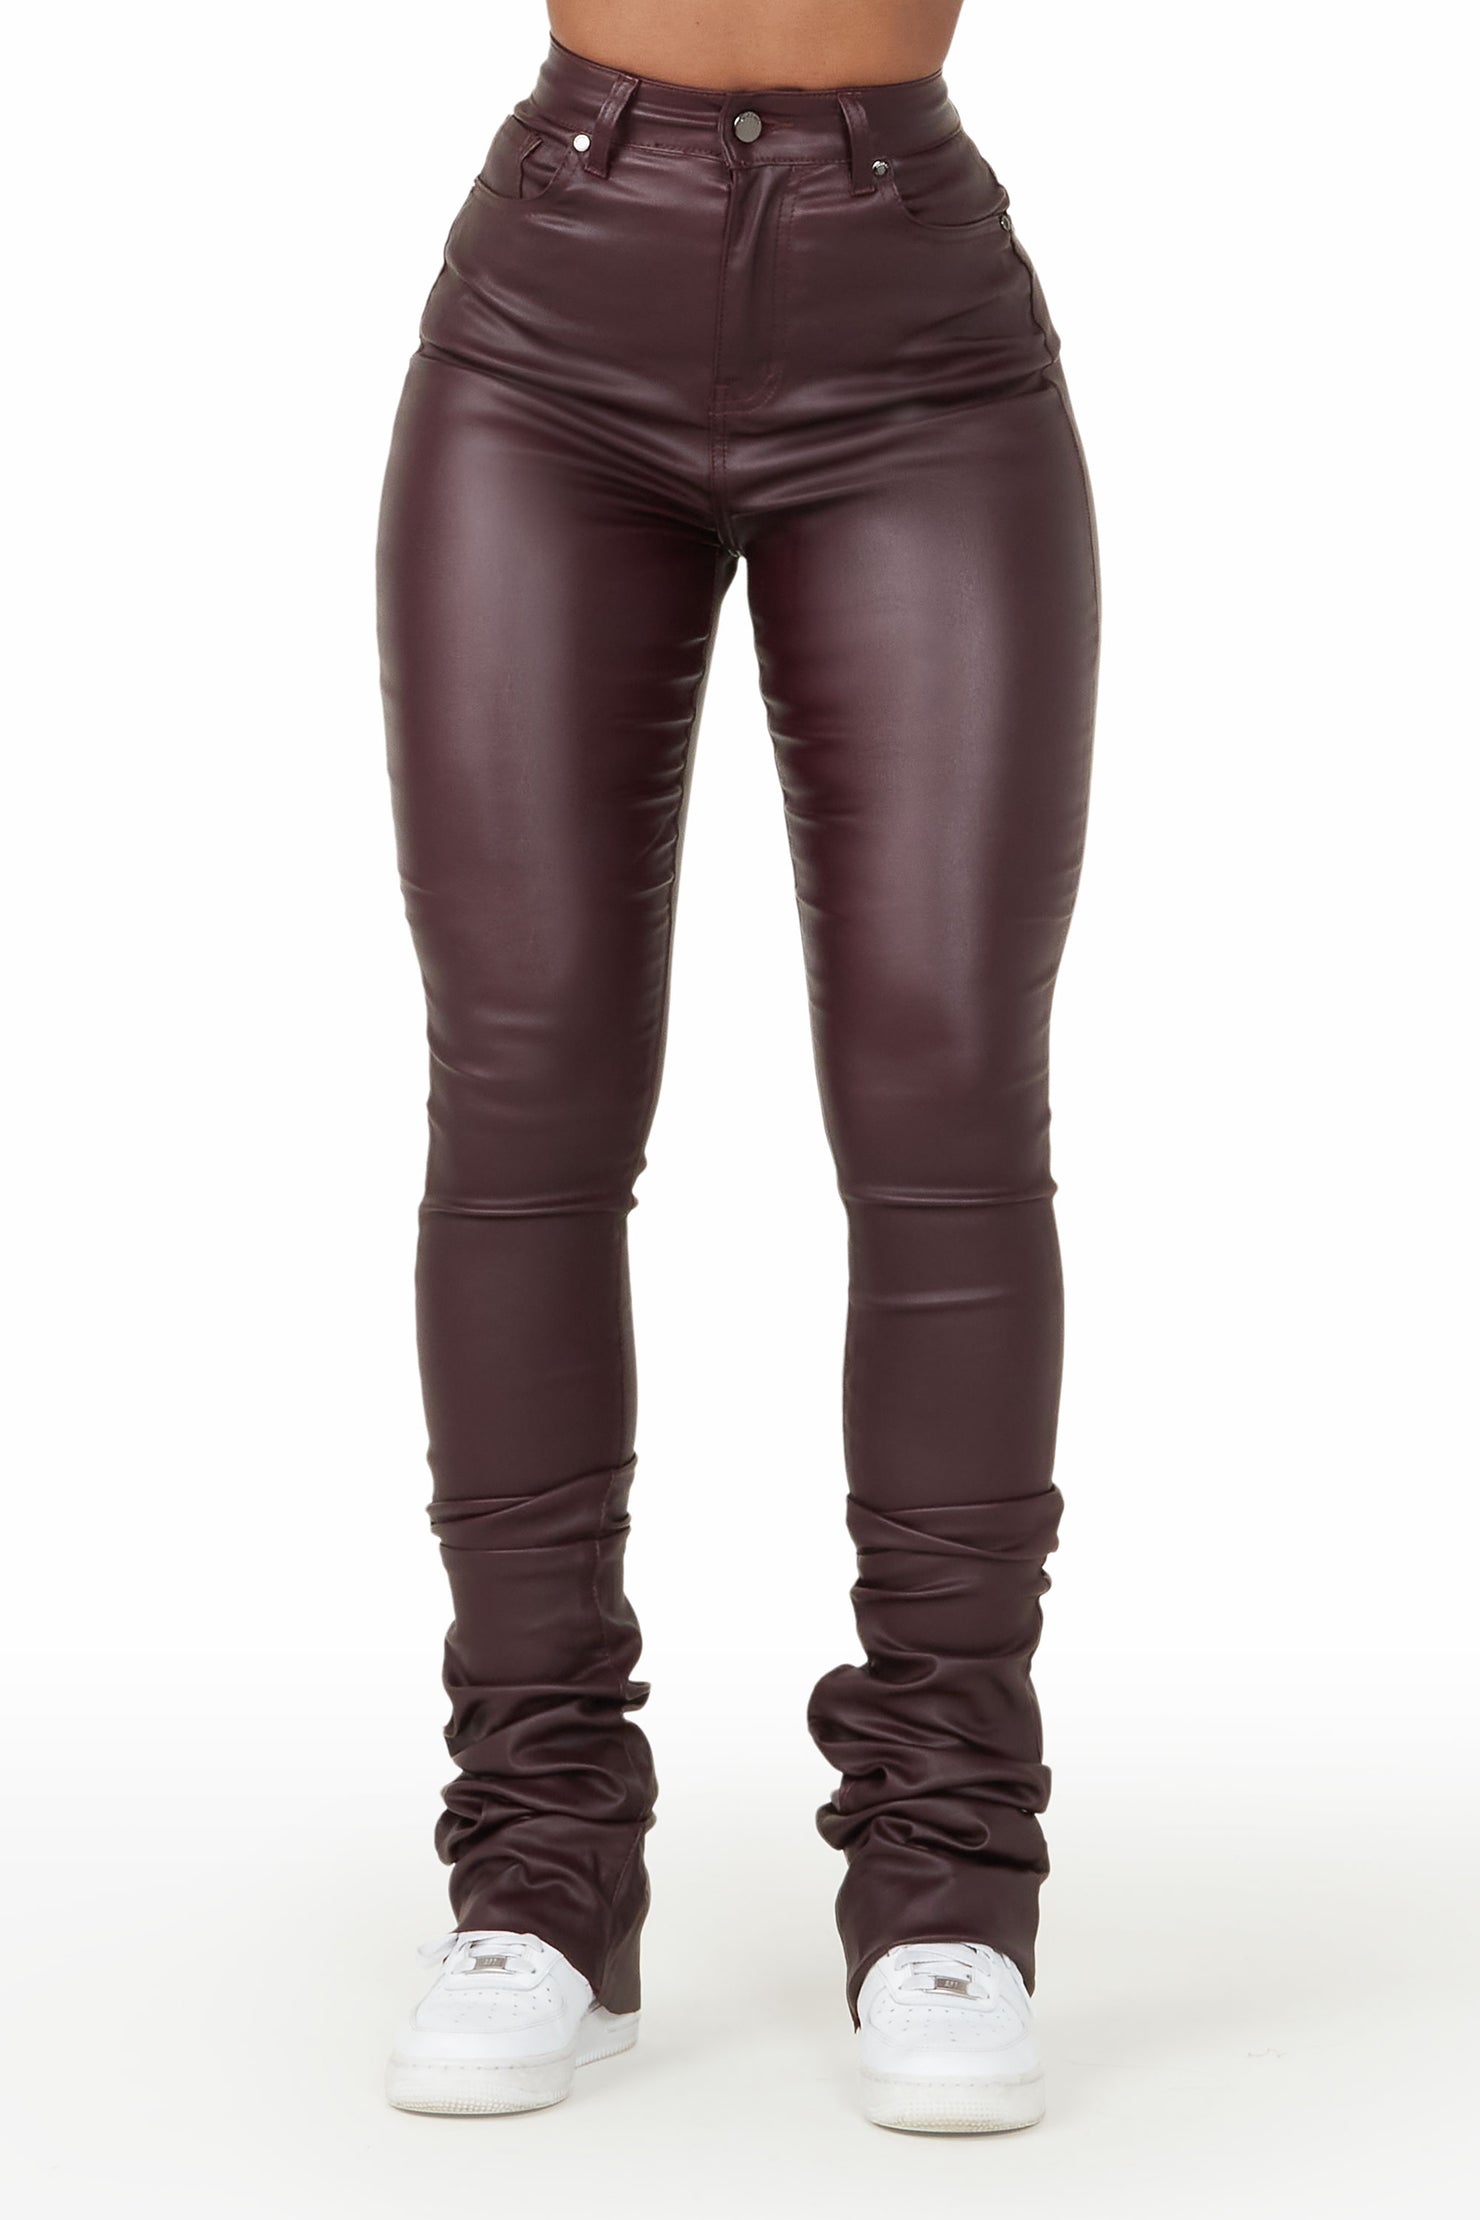 High Waisted Stacked Leggings Flare Pants